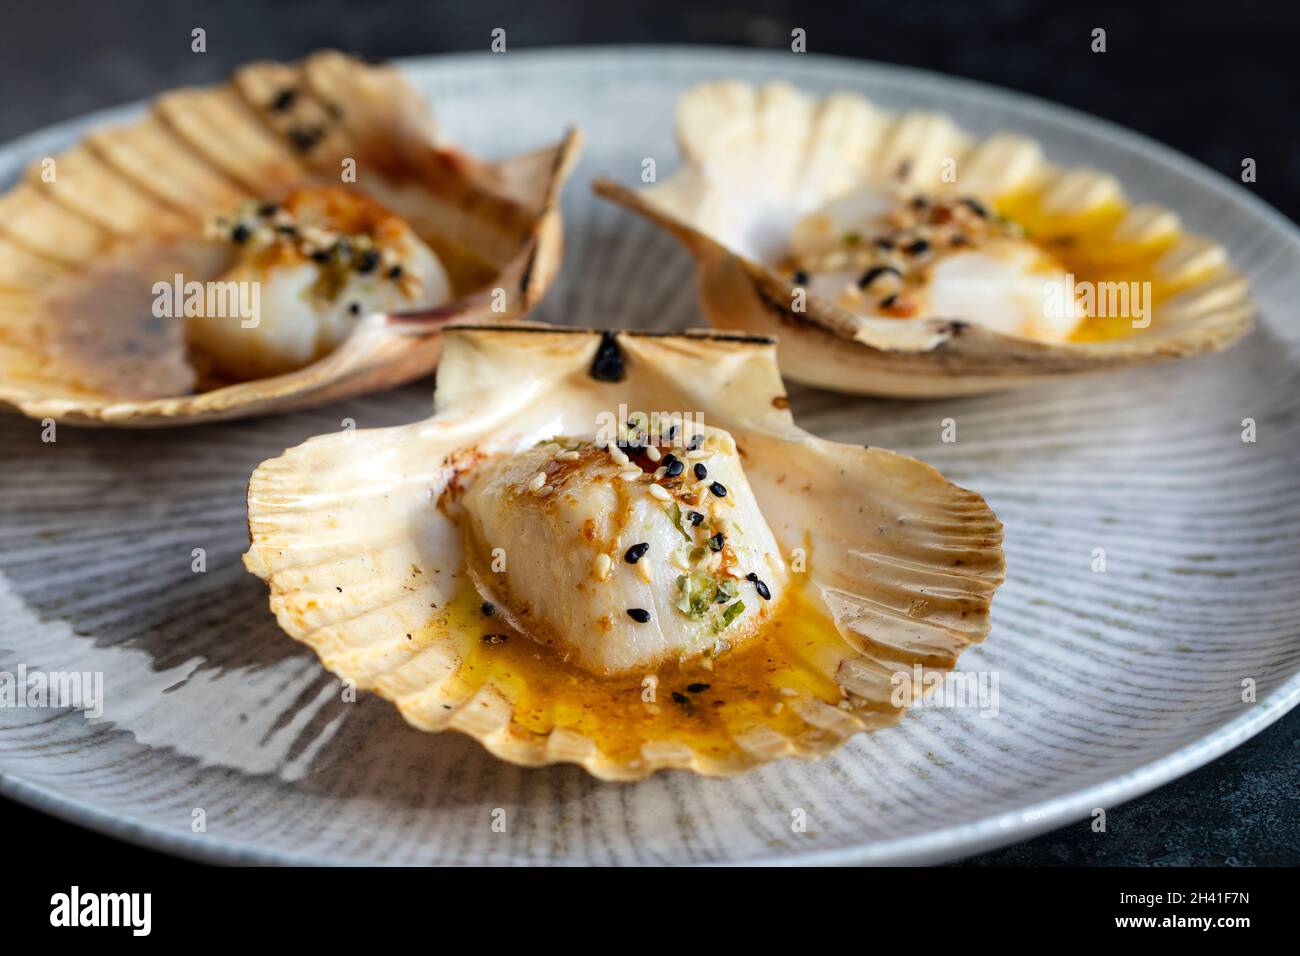 Grilled scallop with miso butter and sesame seeds on cauliflower puree Stock Photo